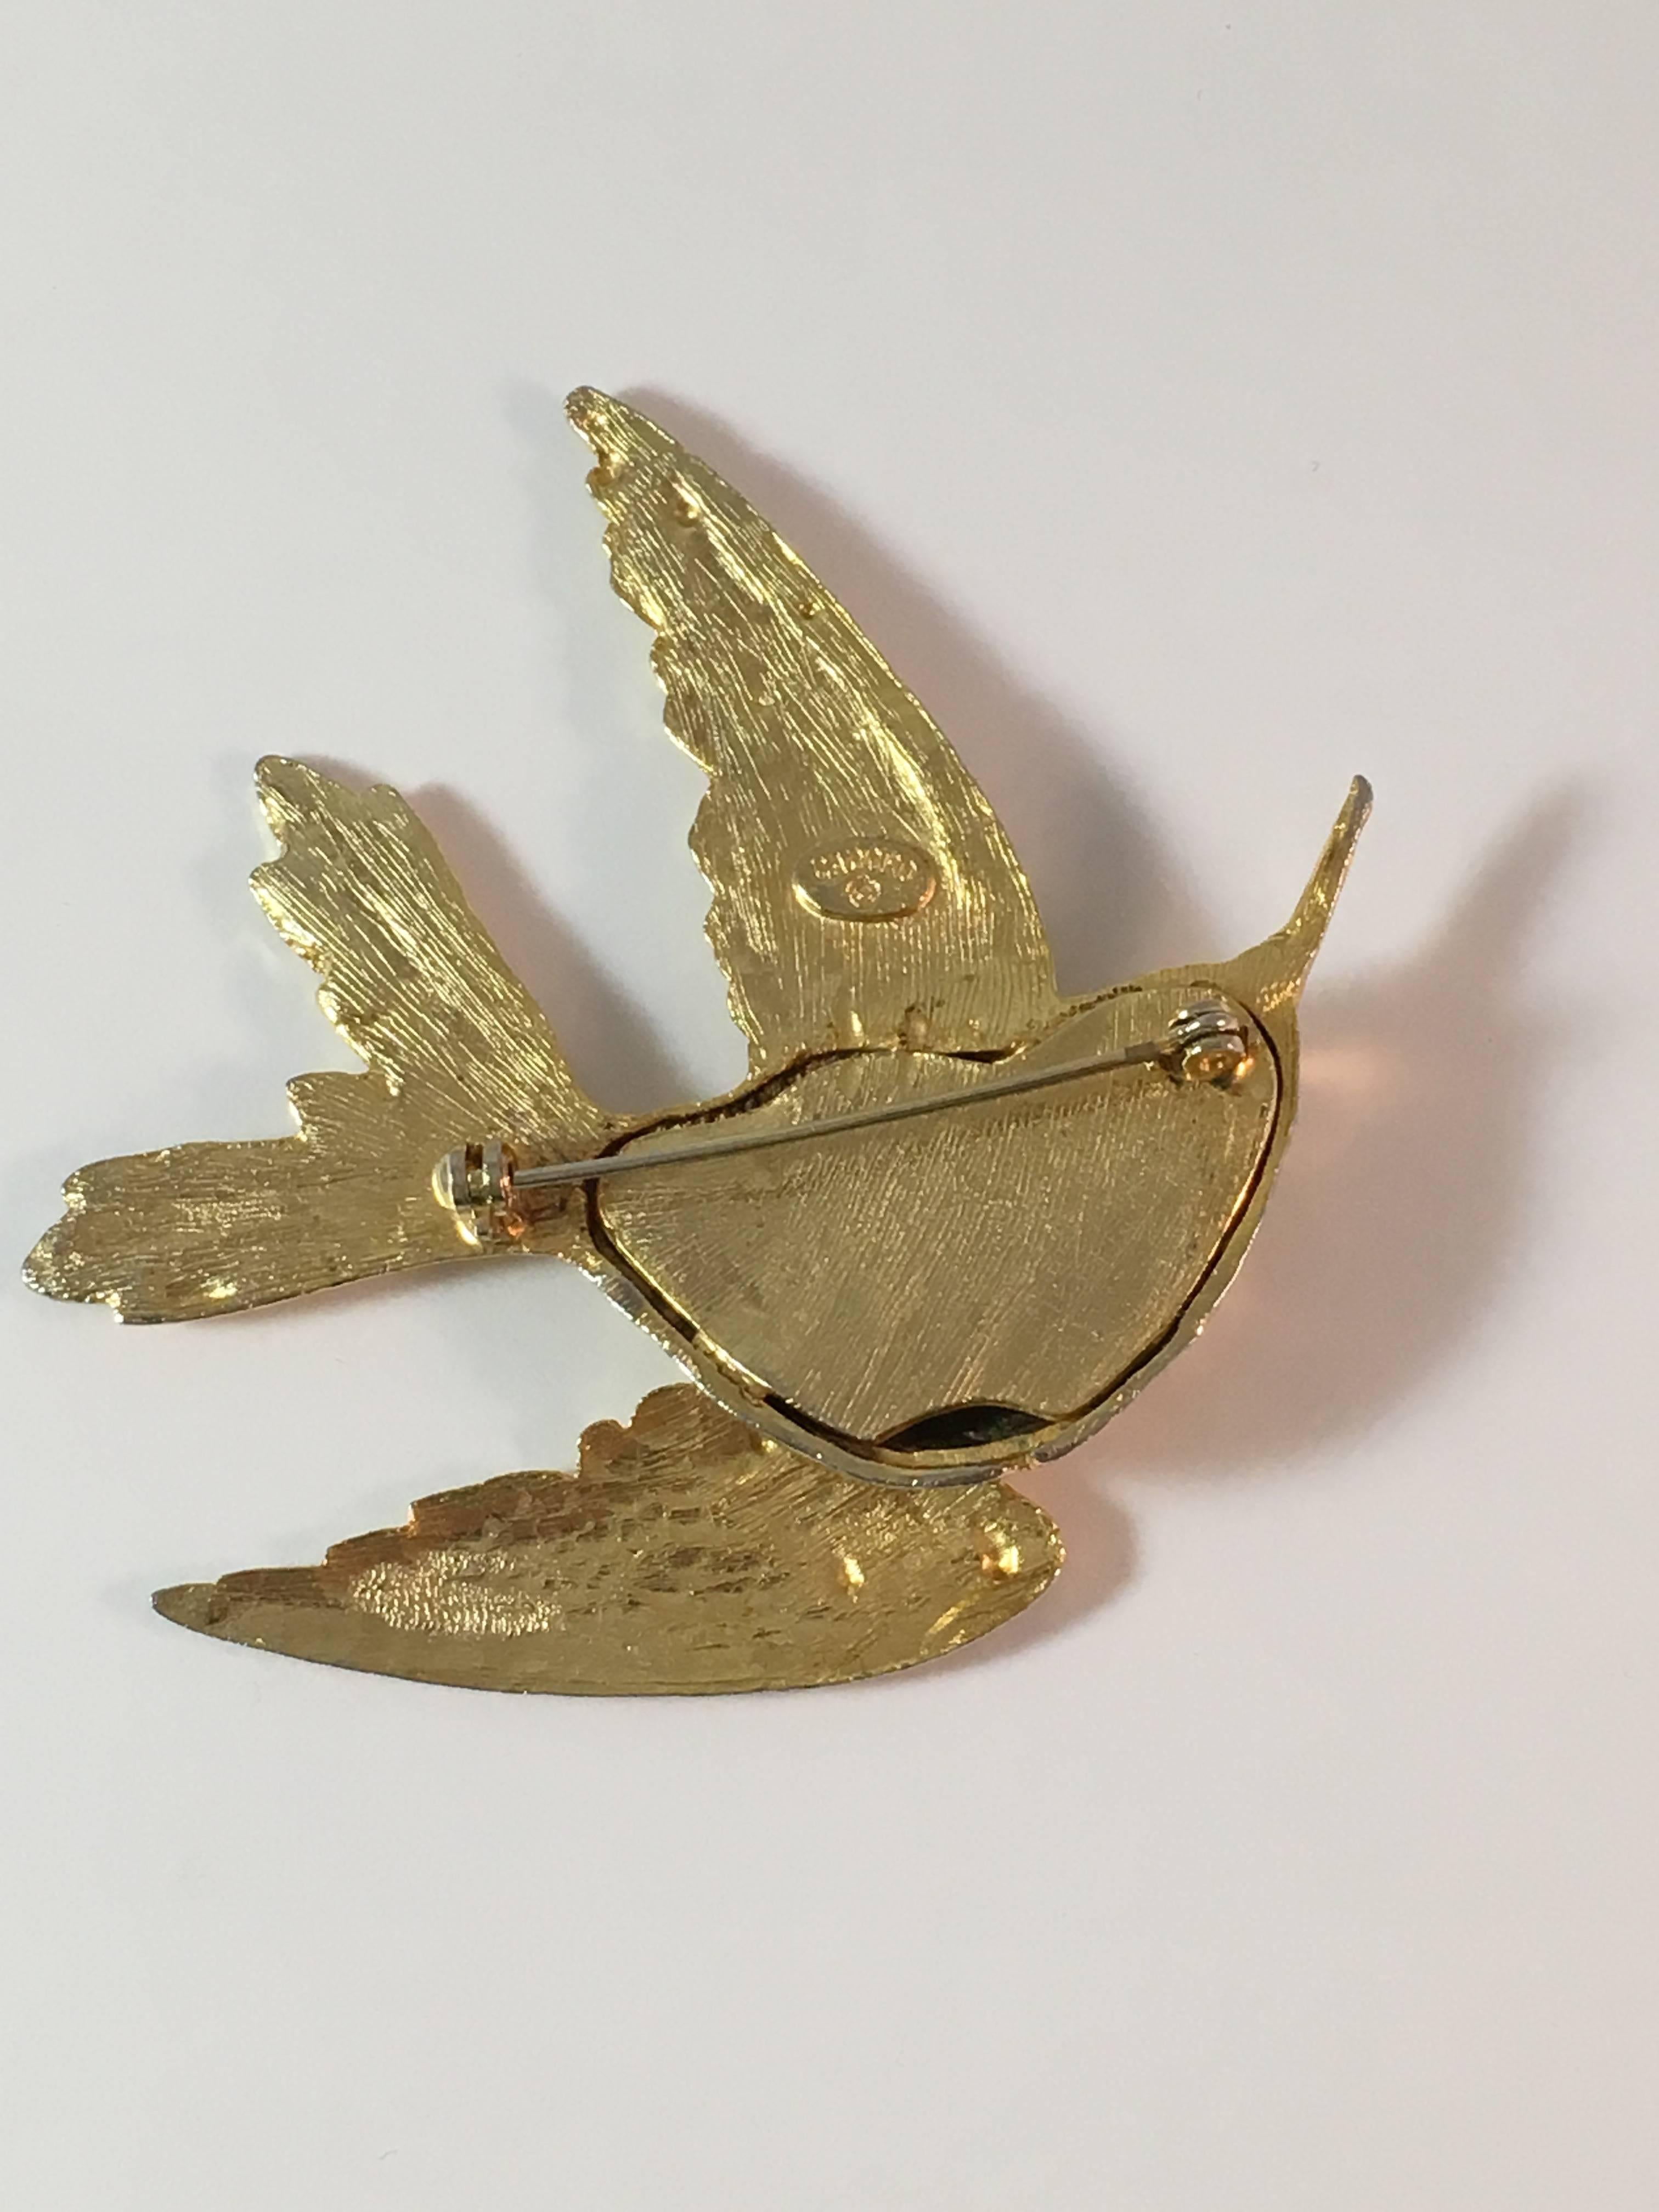 1950s Cadoro Hummingbird Brooch In Excellent Condition For Sale In Chicago, IL